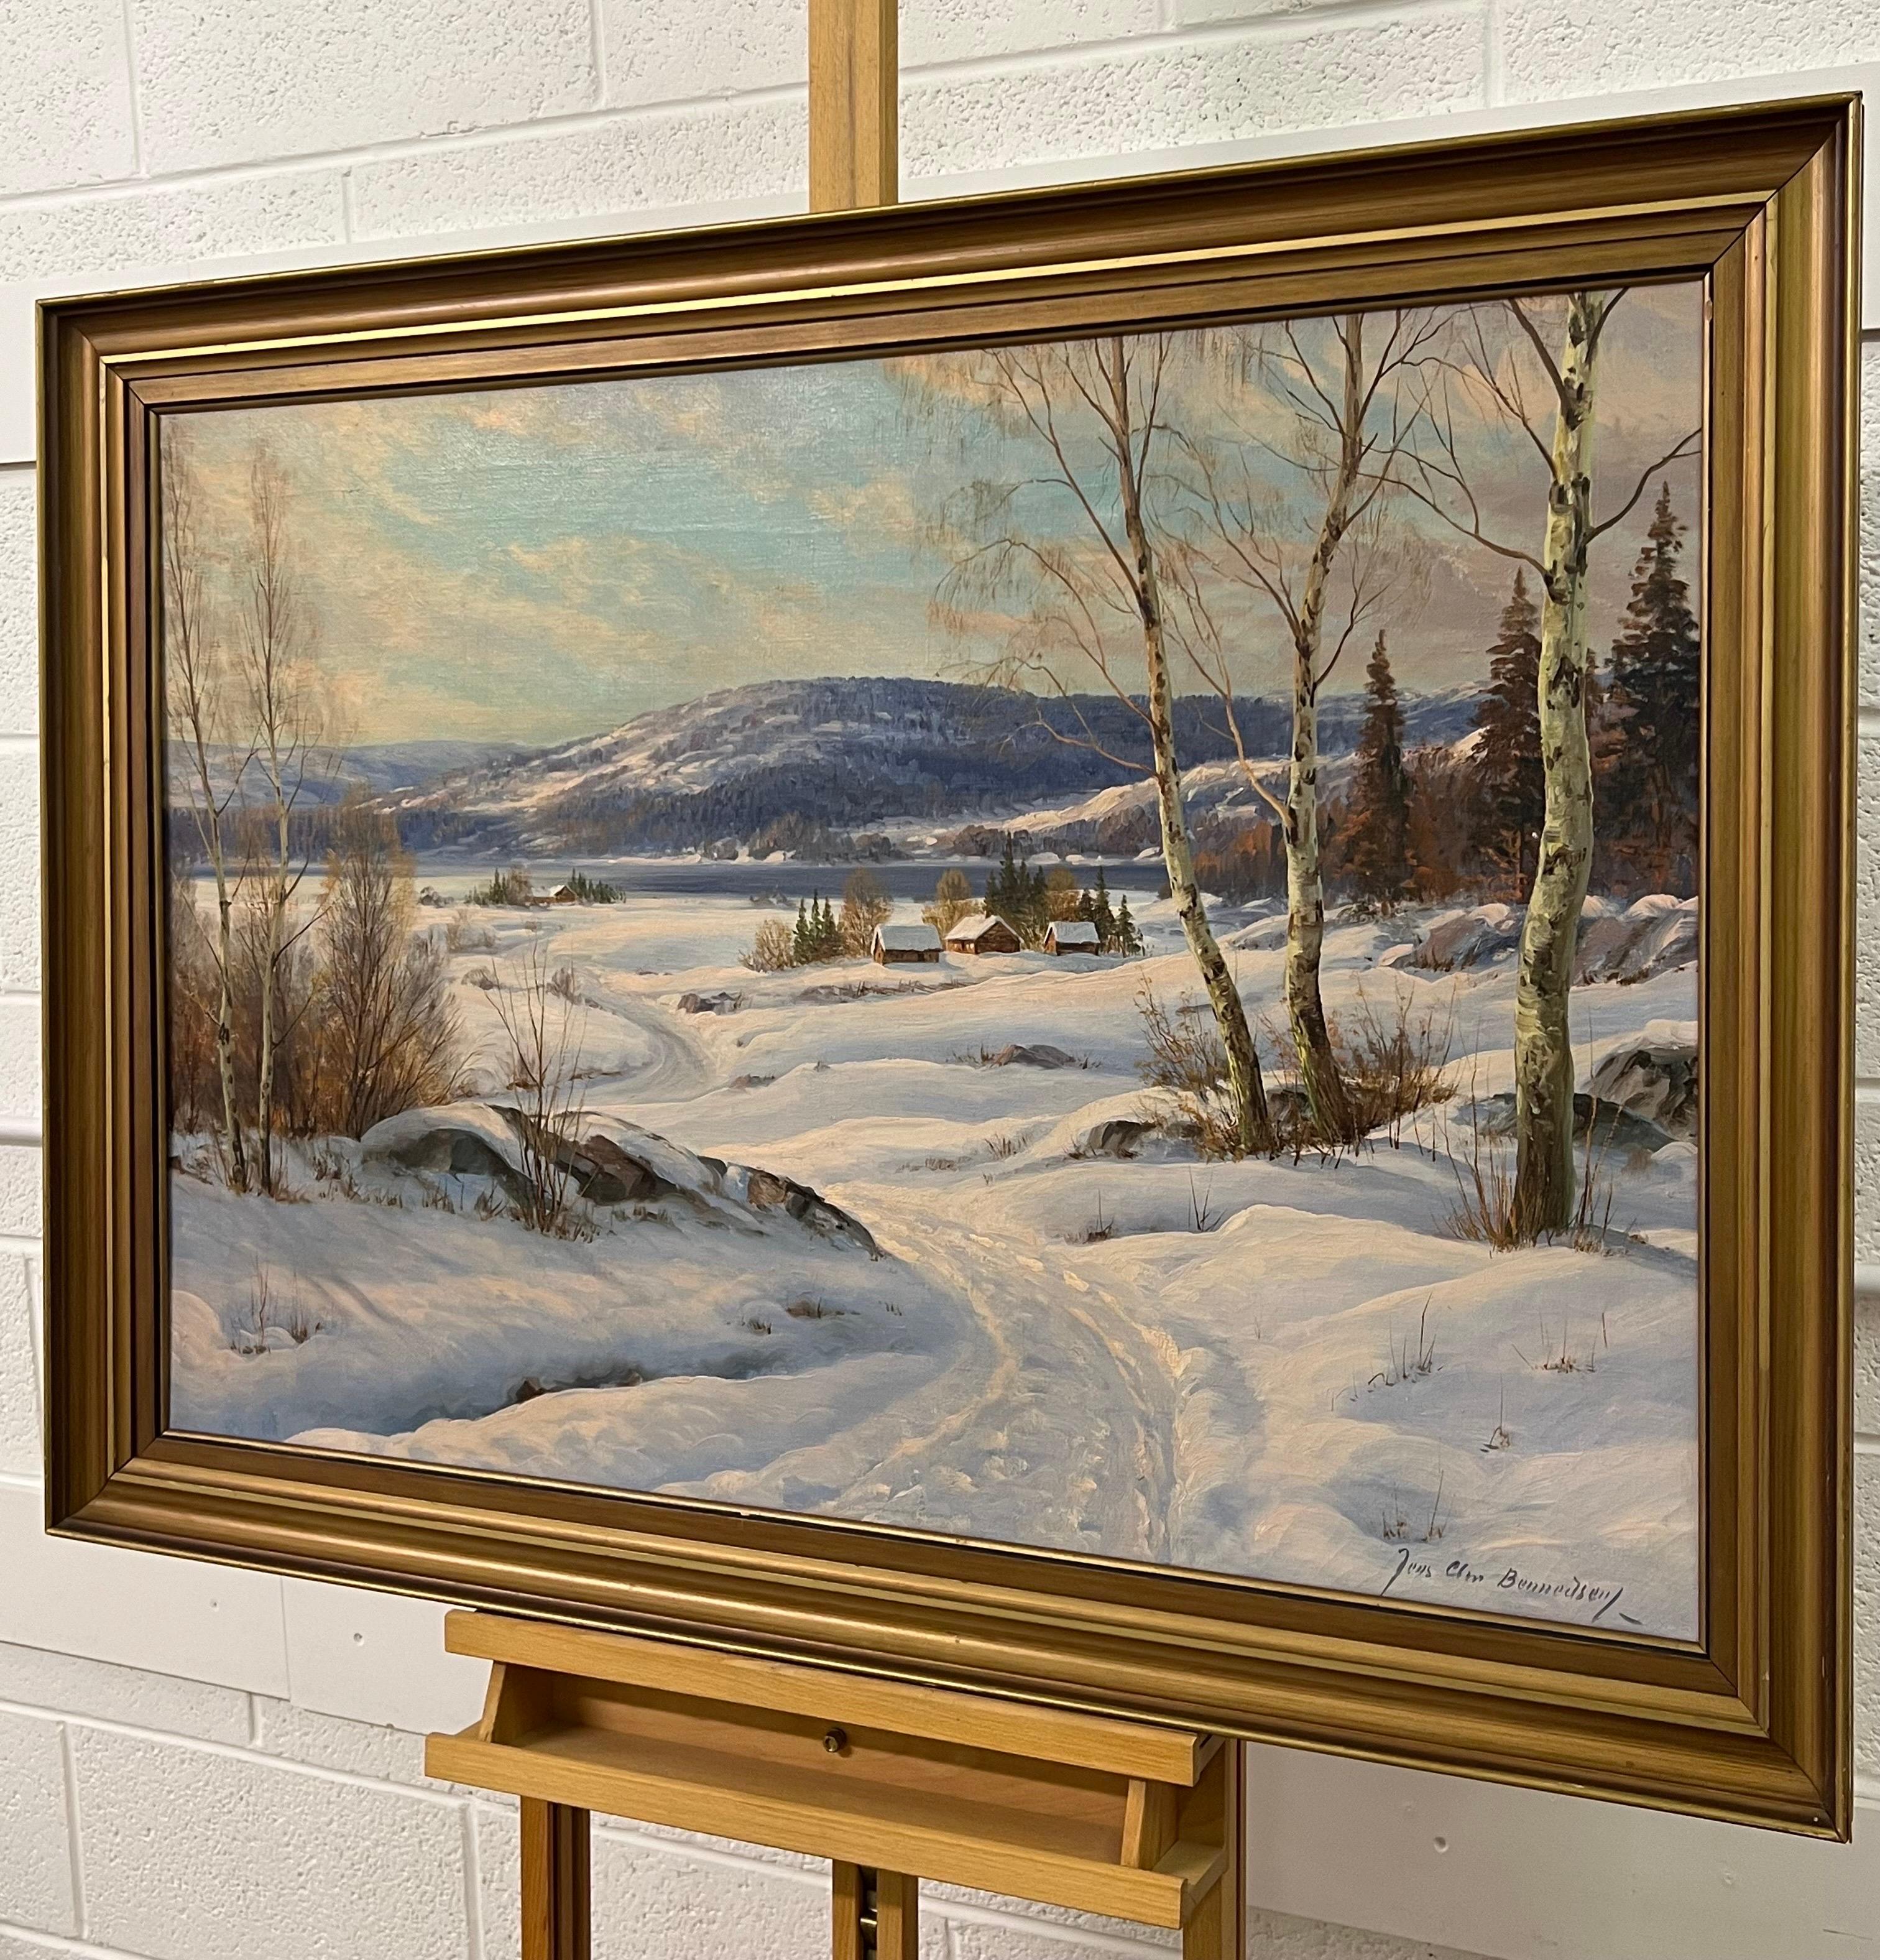 Swedish Hamlet in a Snowy Winter Landscape with Birch Trees by Danish Artist - Realist Painting by Jens Christian Bennedsen